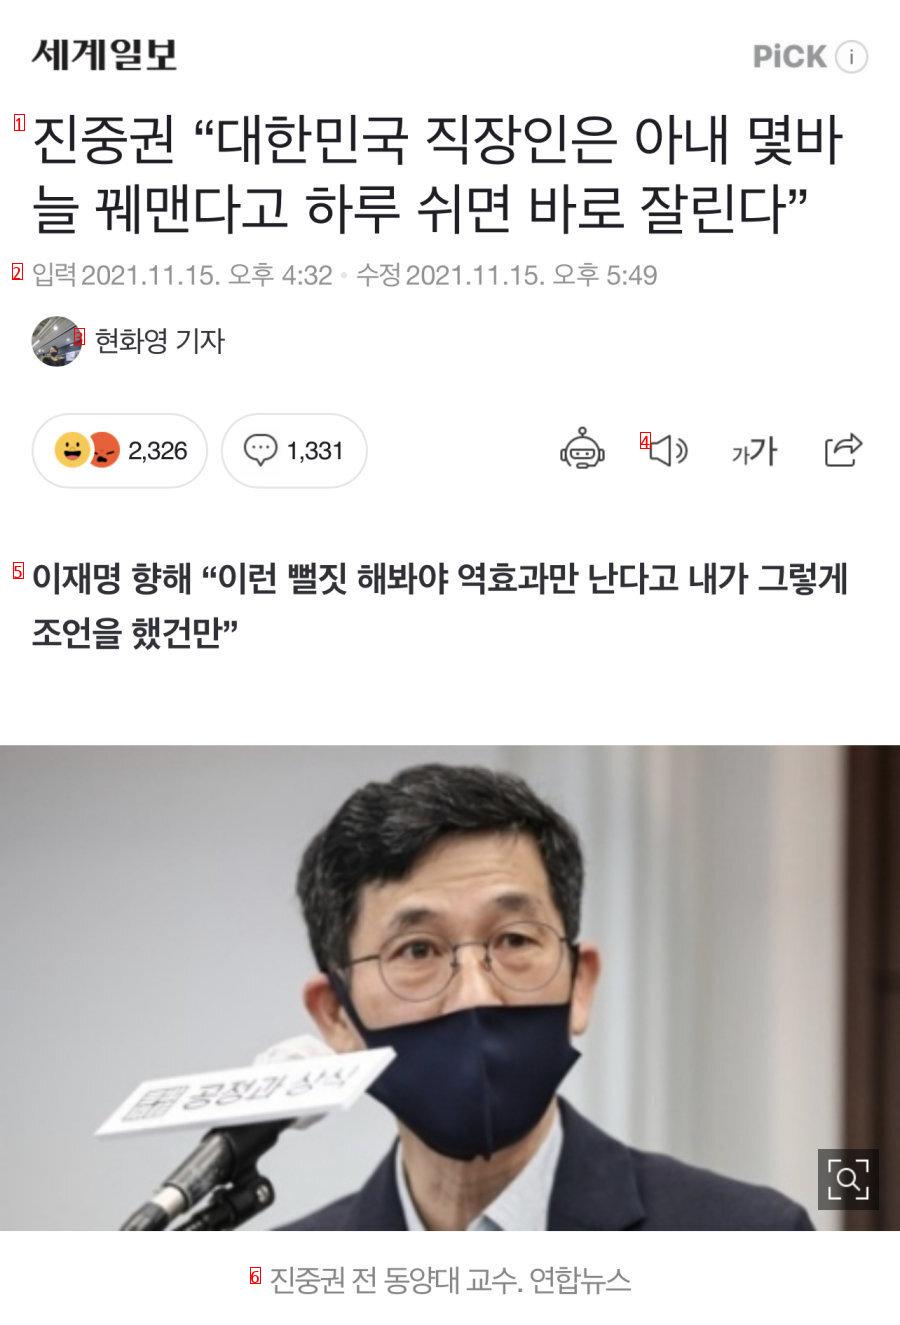 Jin Joong-kwon said, "In Korea, if you take a vacation because your wife is sick, you will be fired immediately."